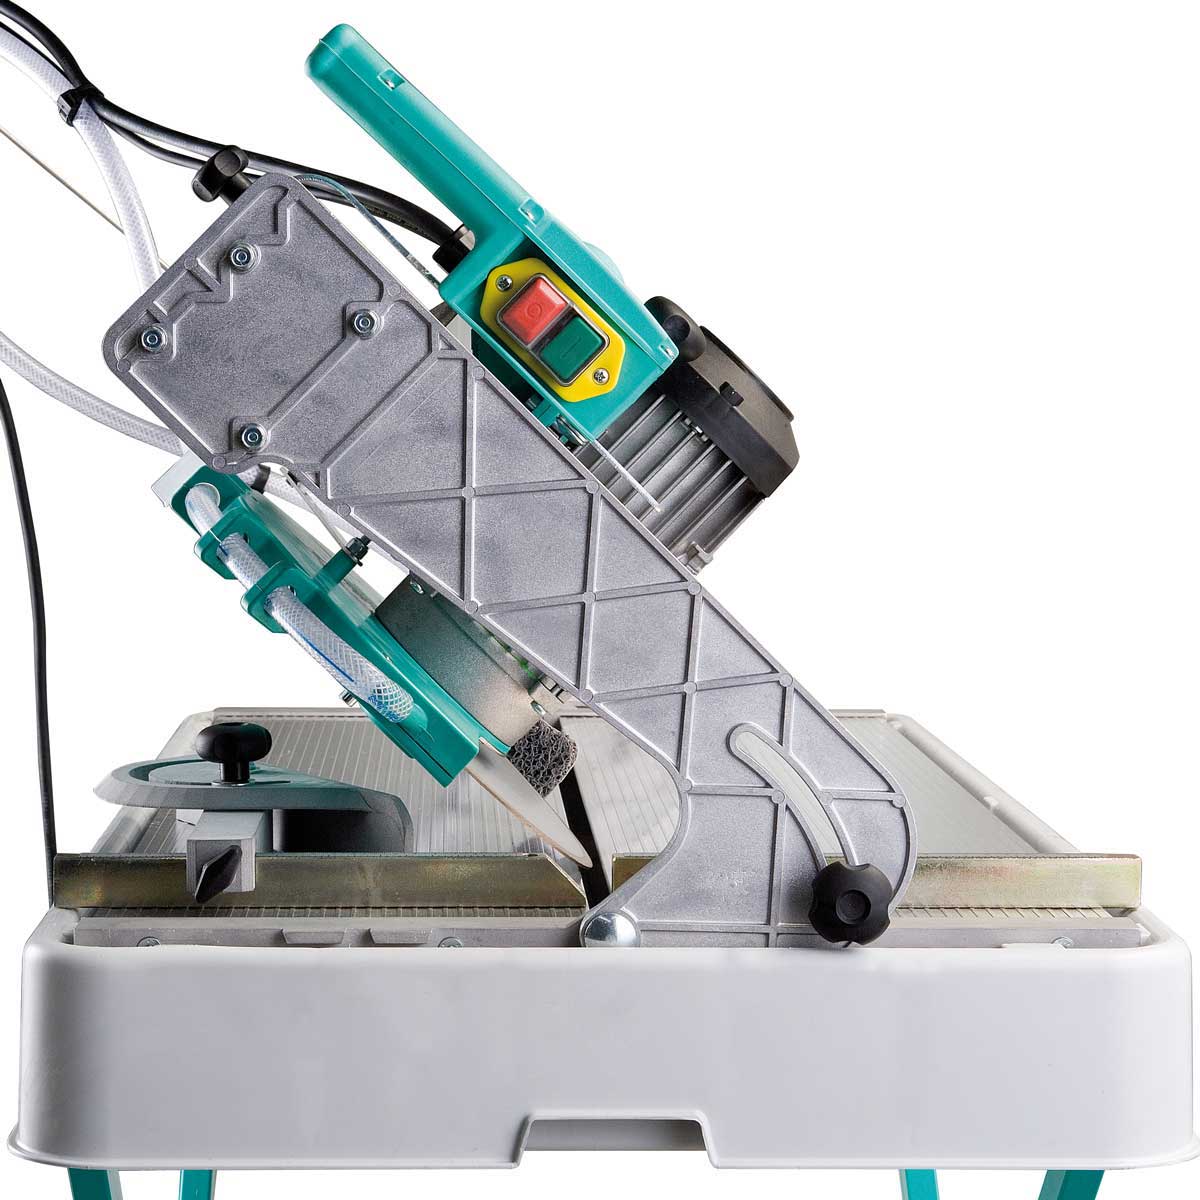 IMER Combicut 250VA Tile & Stone Saw - FREE DEPOT SHIPPING (Conditions Apply) (7444877765)